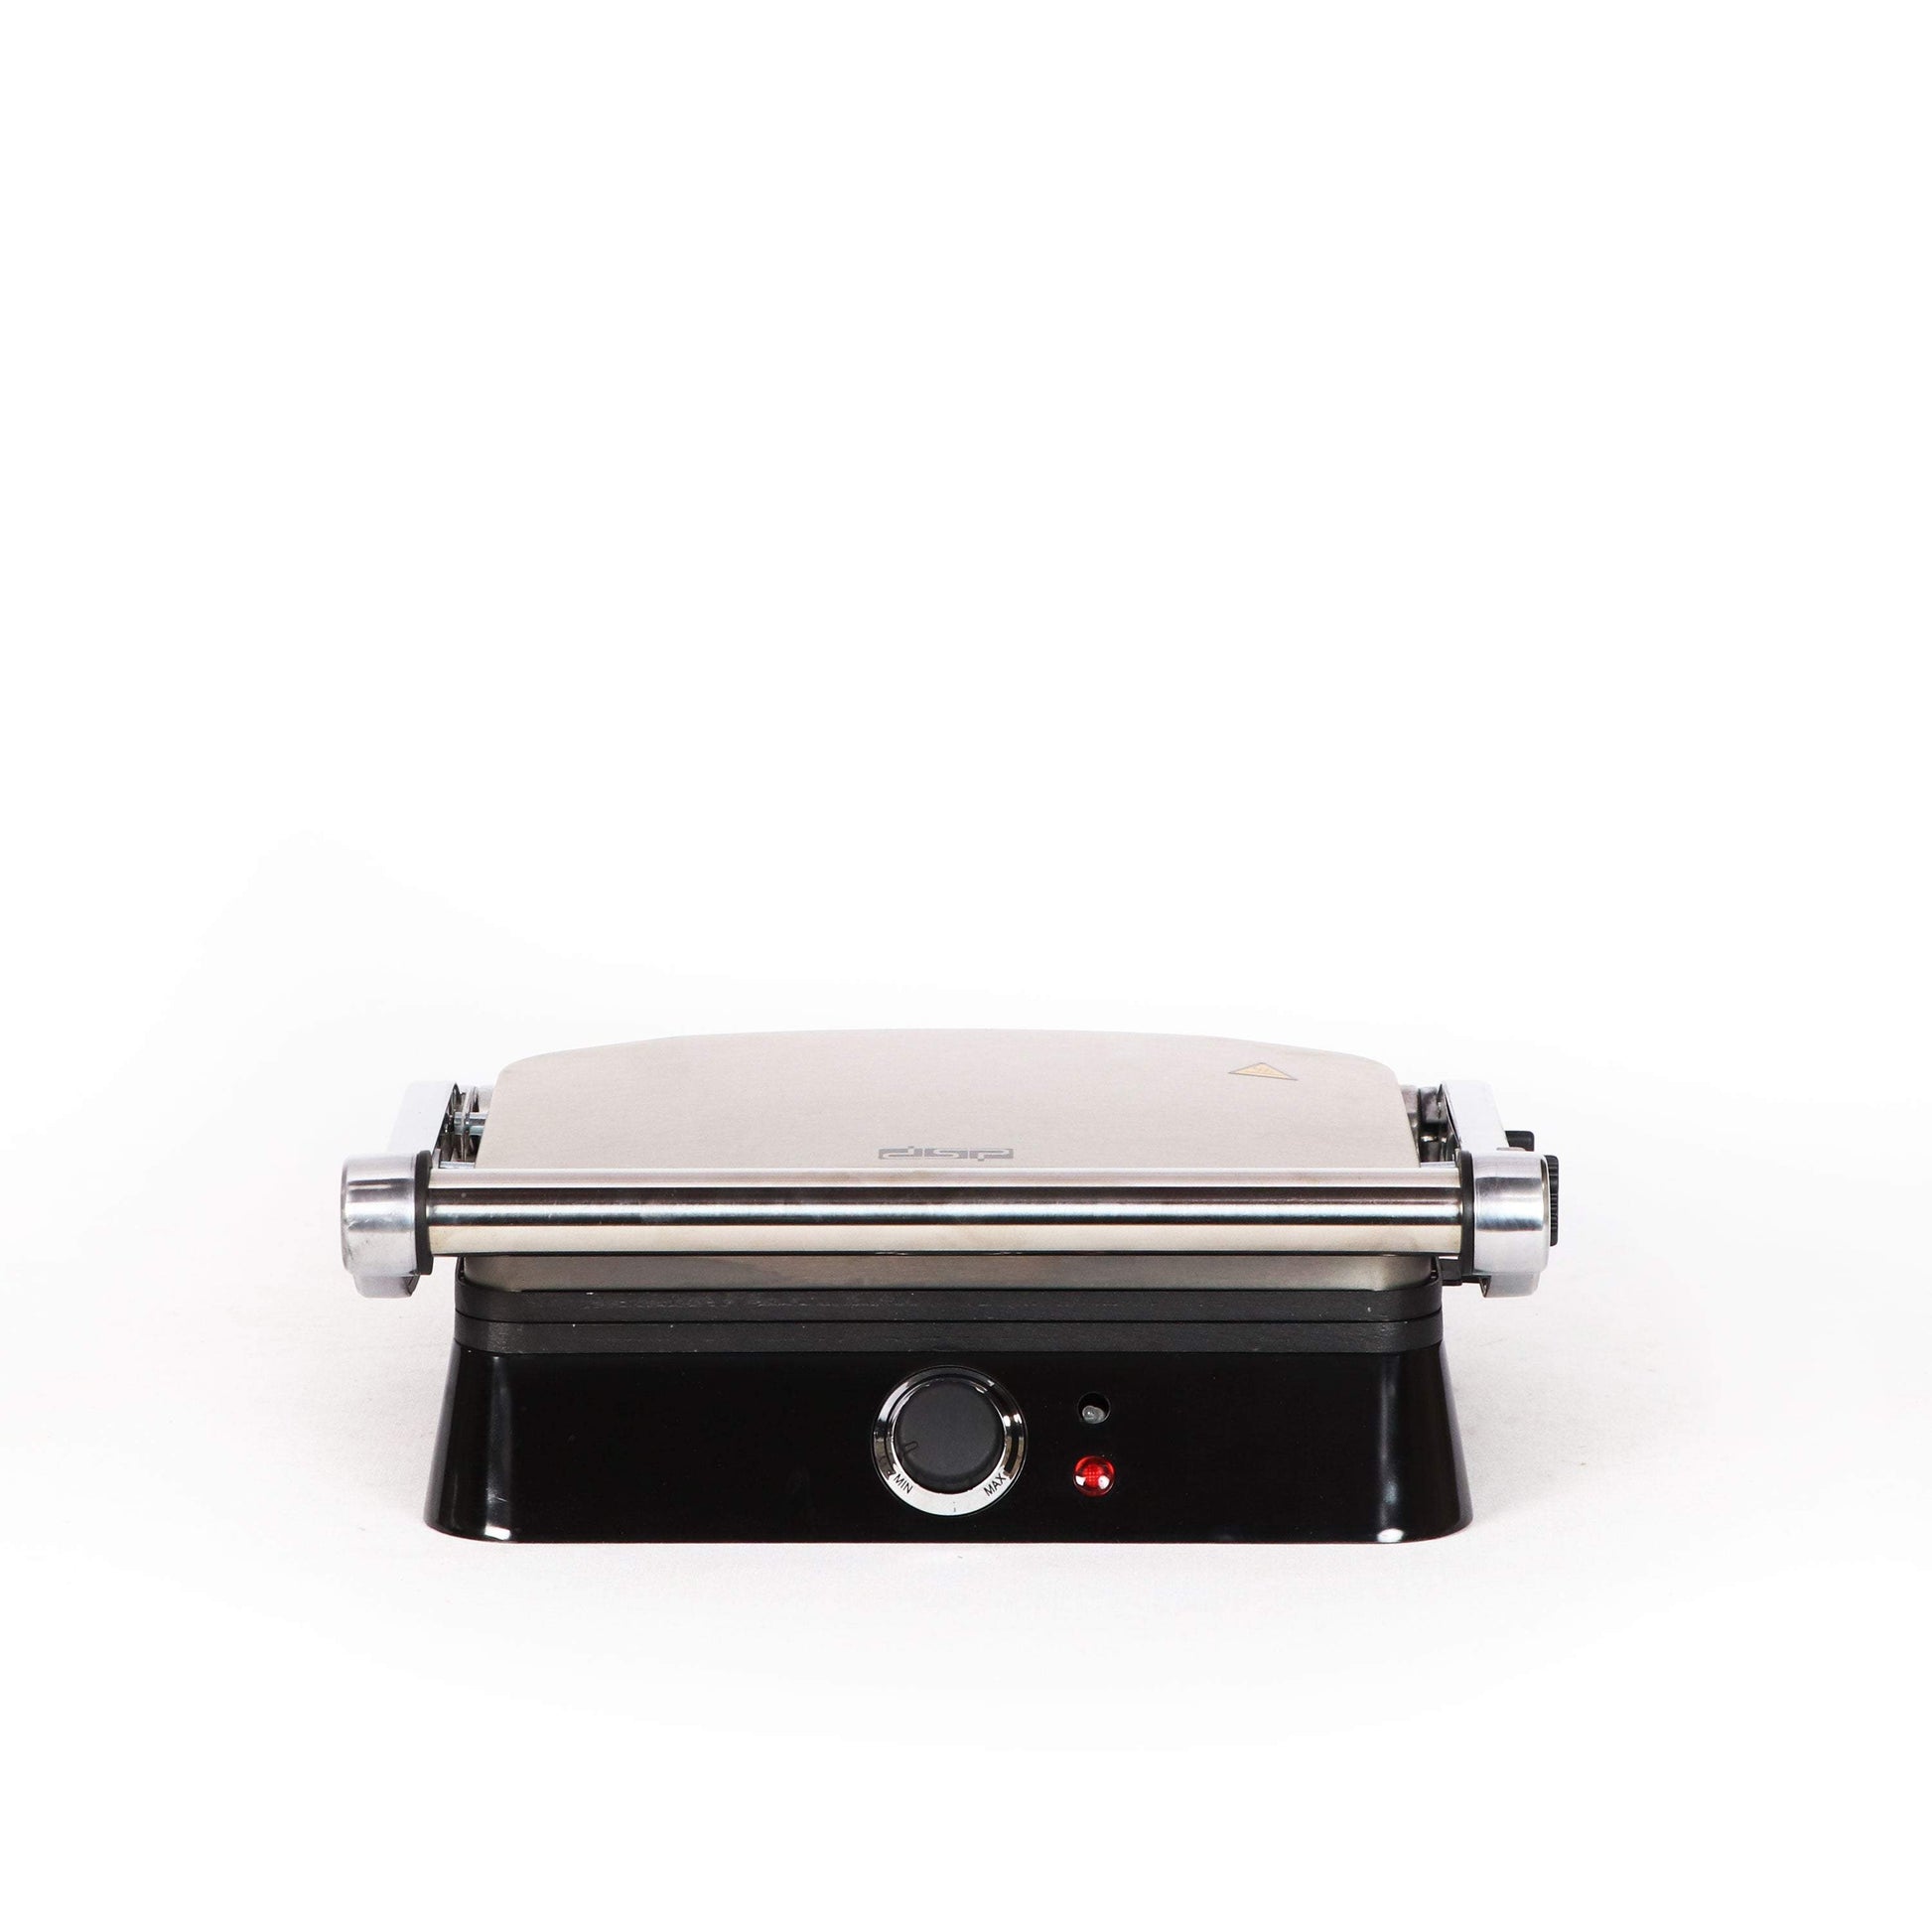 DSP Healthy Grill 1400W-Royal Brands Co-